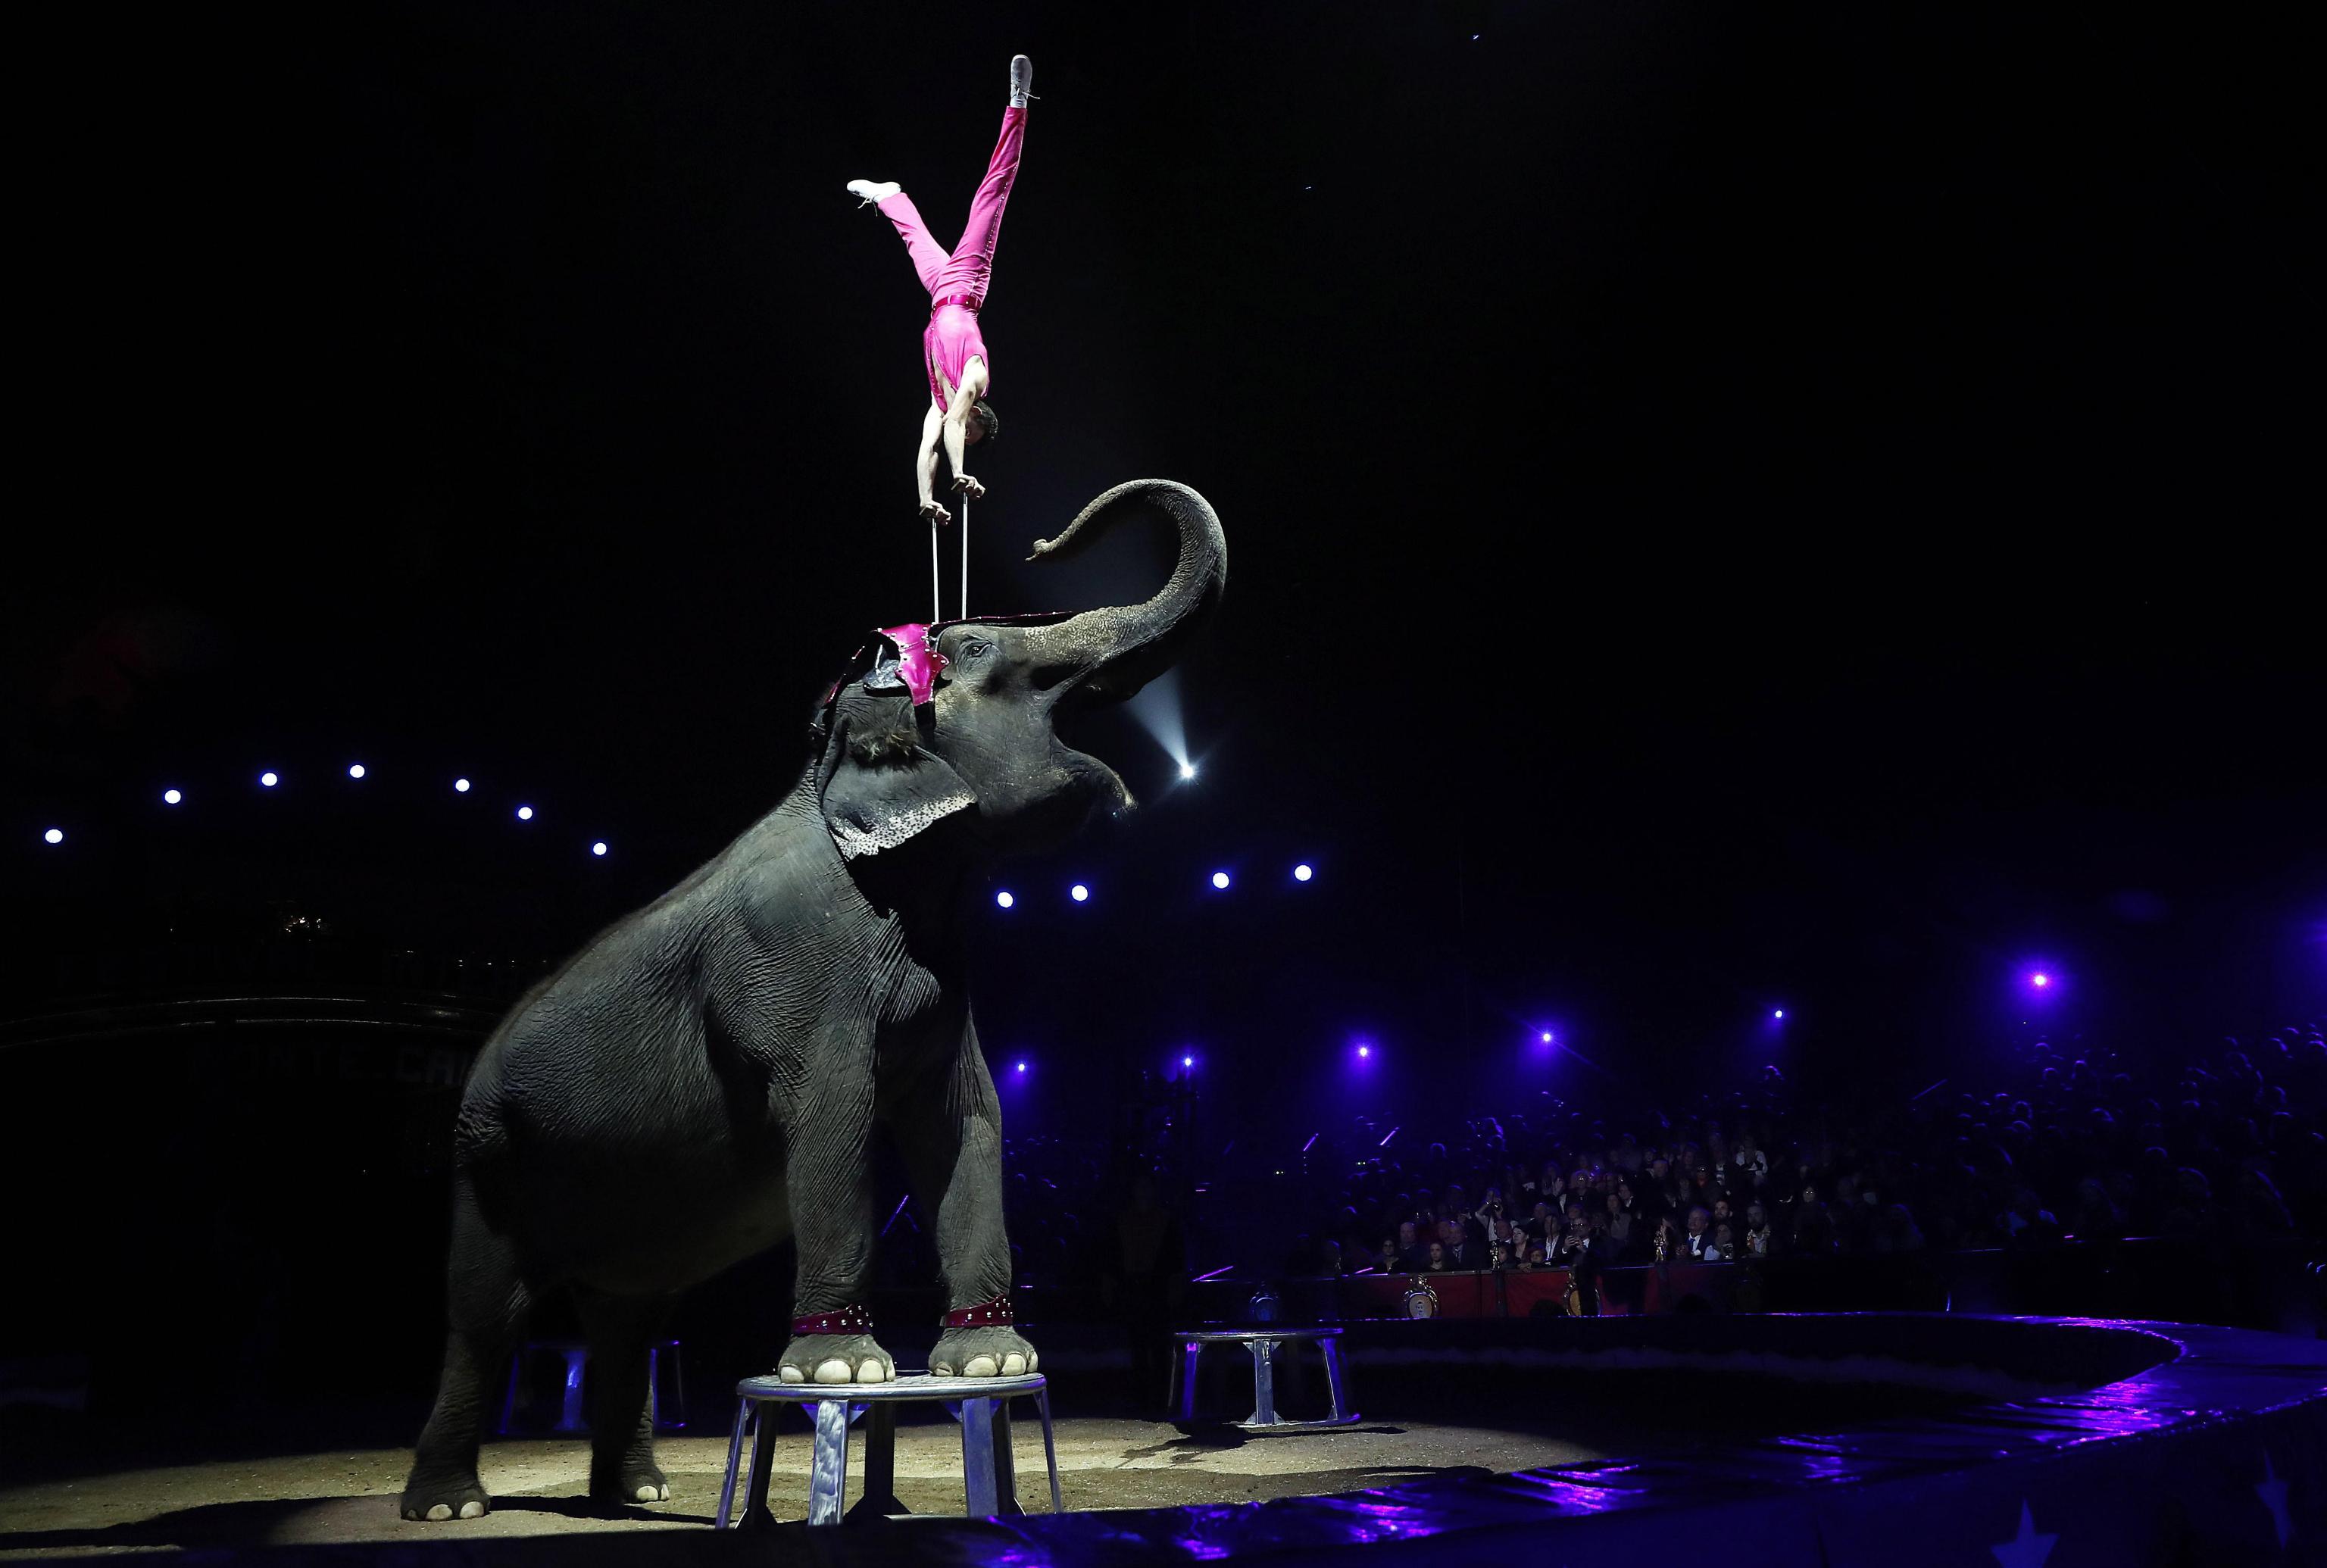 epa07294685 Joy Gartner Family member and his elephant performs during the opening ceremony of the 43rd Monte-Carlo International Circus Festival in Monaco, 17 January 2019. The festival runs from 17 to 27 January.  EPA/SEBASTIEN NOGIER / POOL